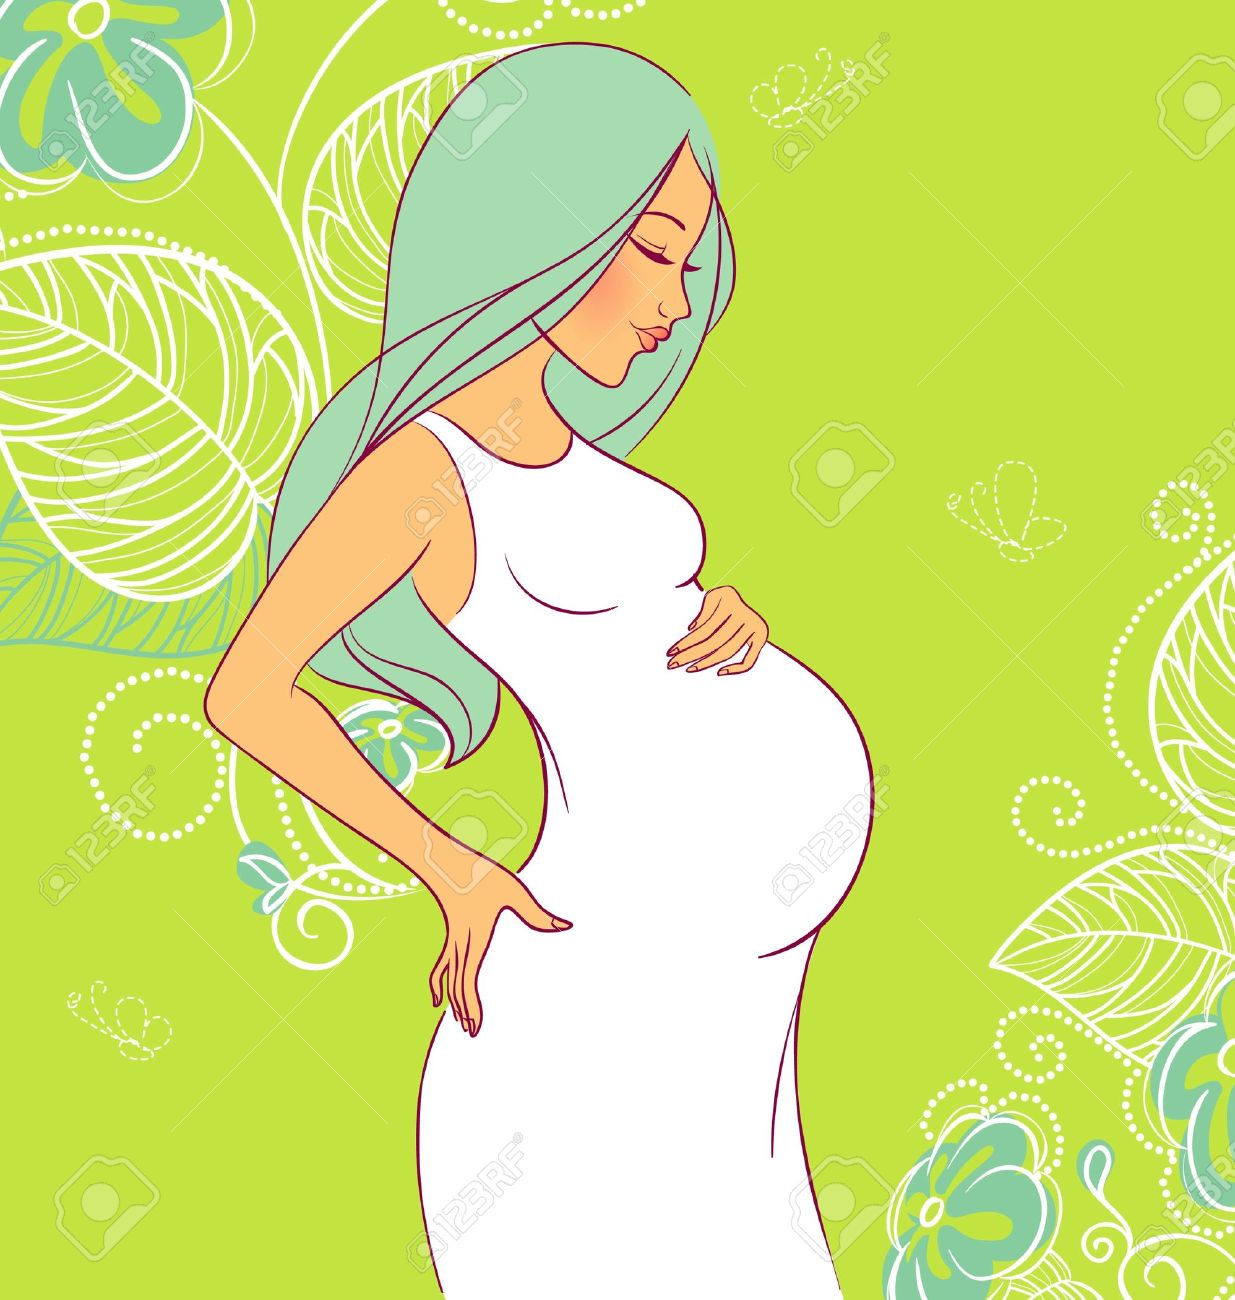 15174985-vector-illustration-of-pregnant-woman-stock-vector-mother